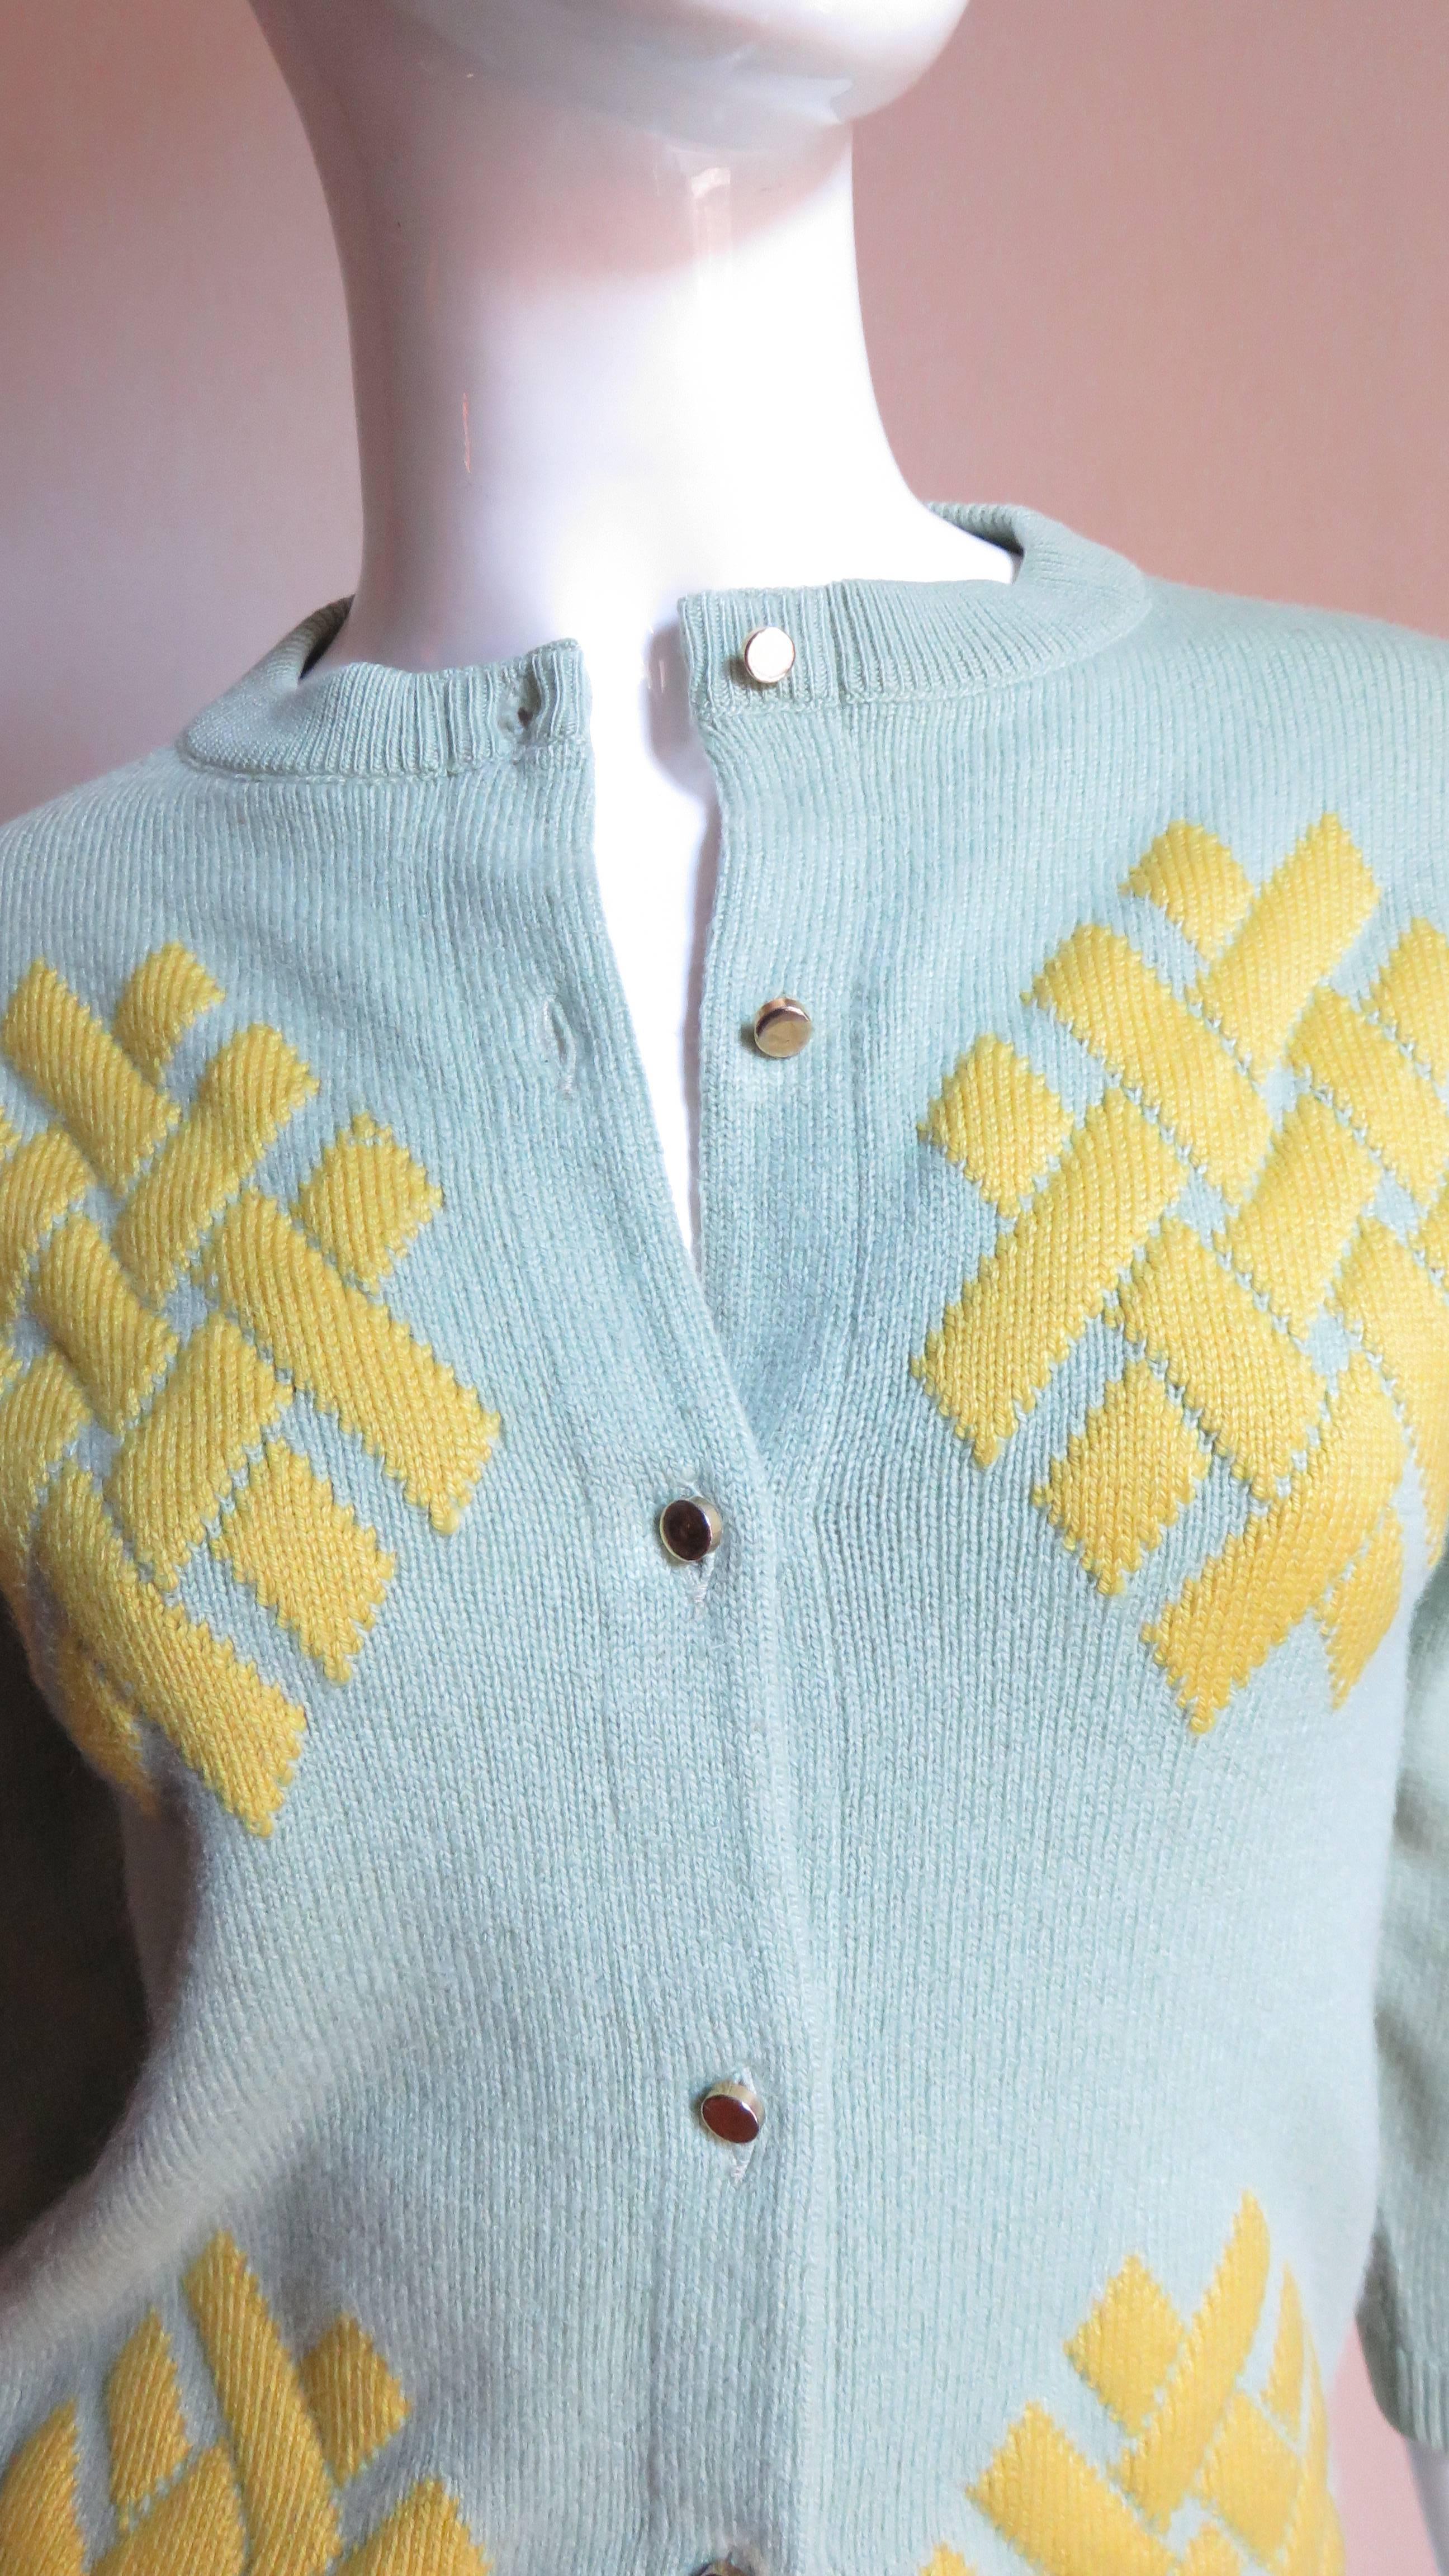 A pretty light green and yellow soft cashmere sweater from Bonnie Cashin.  It has 3/4 length sleeves and closes up the front with small gold metal buttons.  The crew neck, cuffs and hem are all ribbed.  There are 4 patches of yellow in a geometric